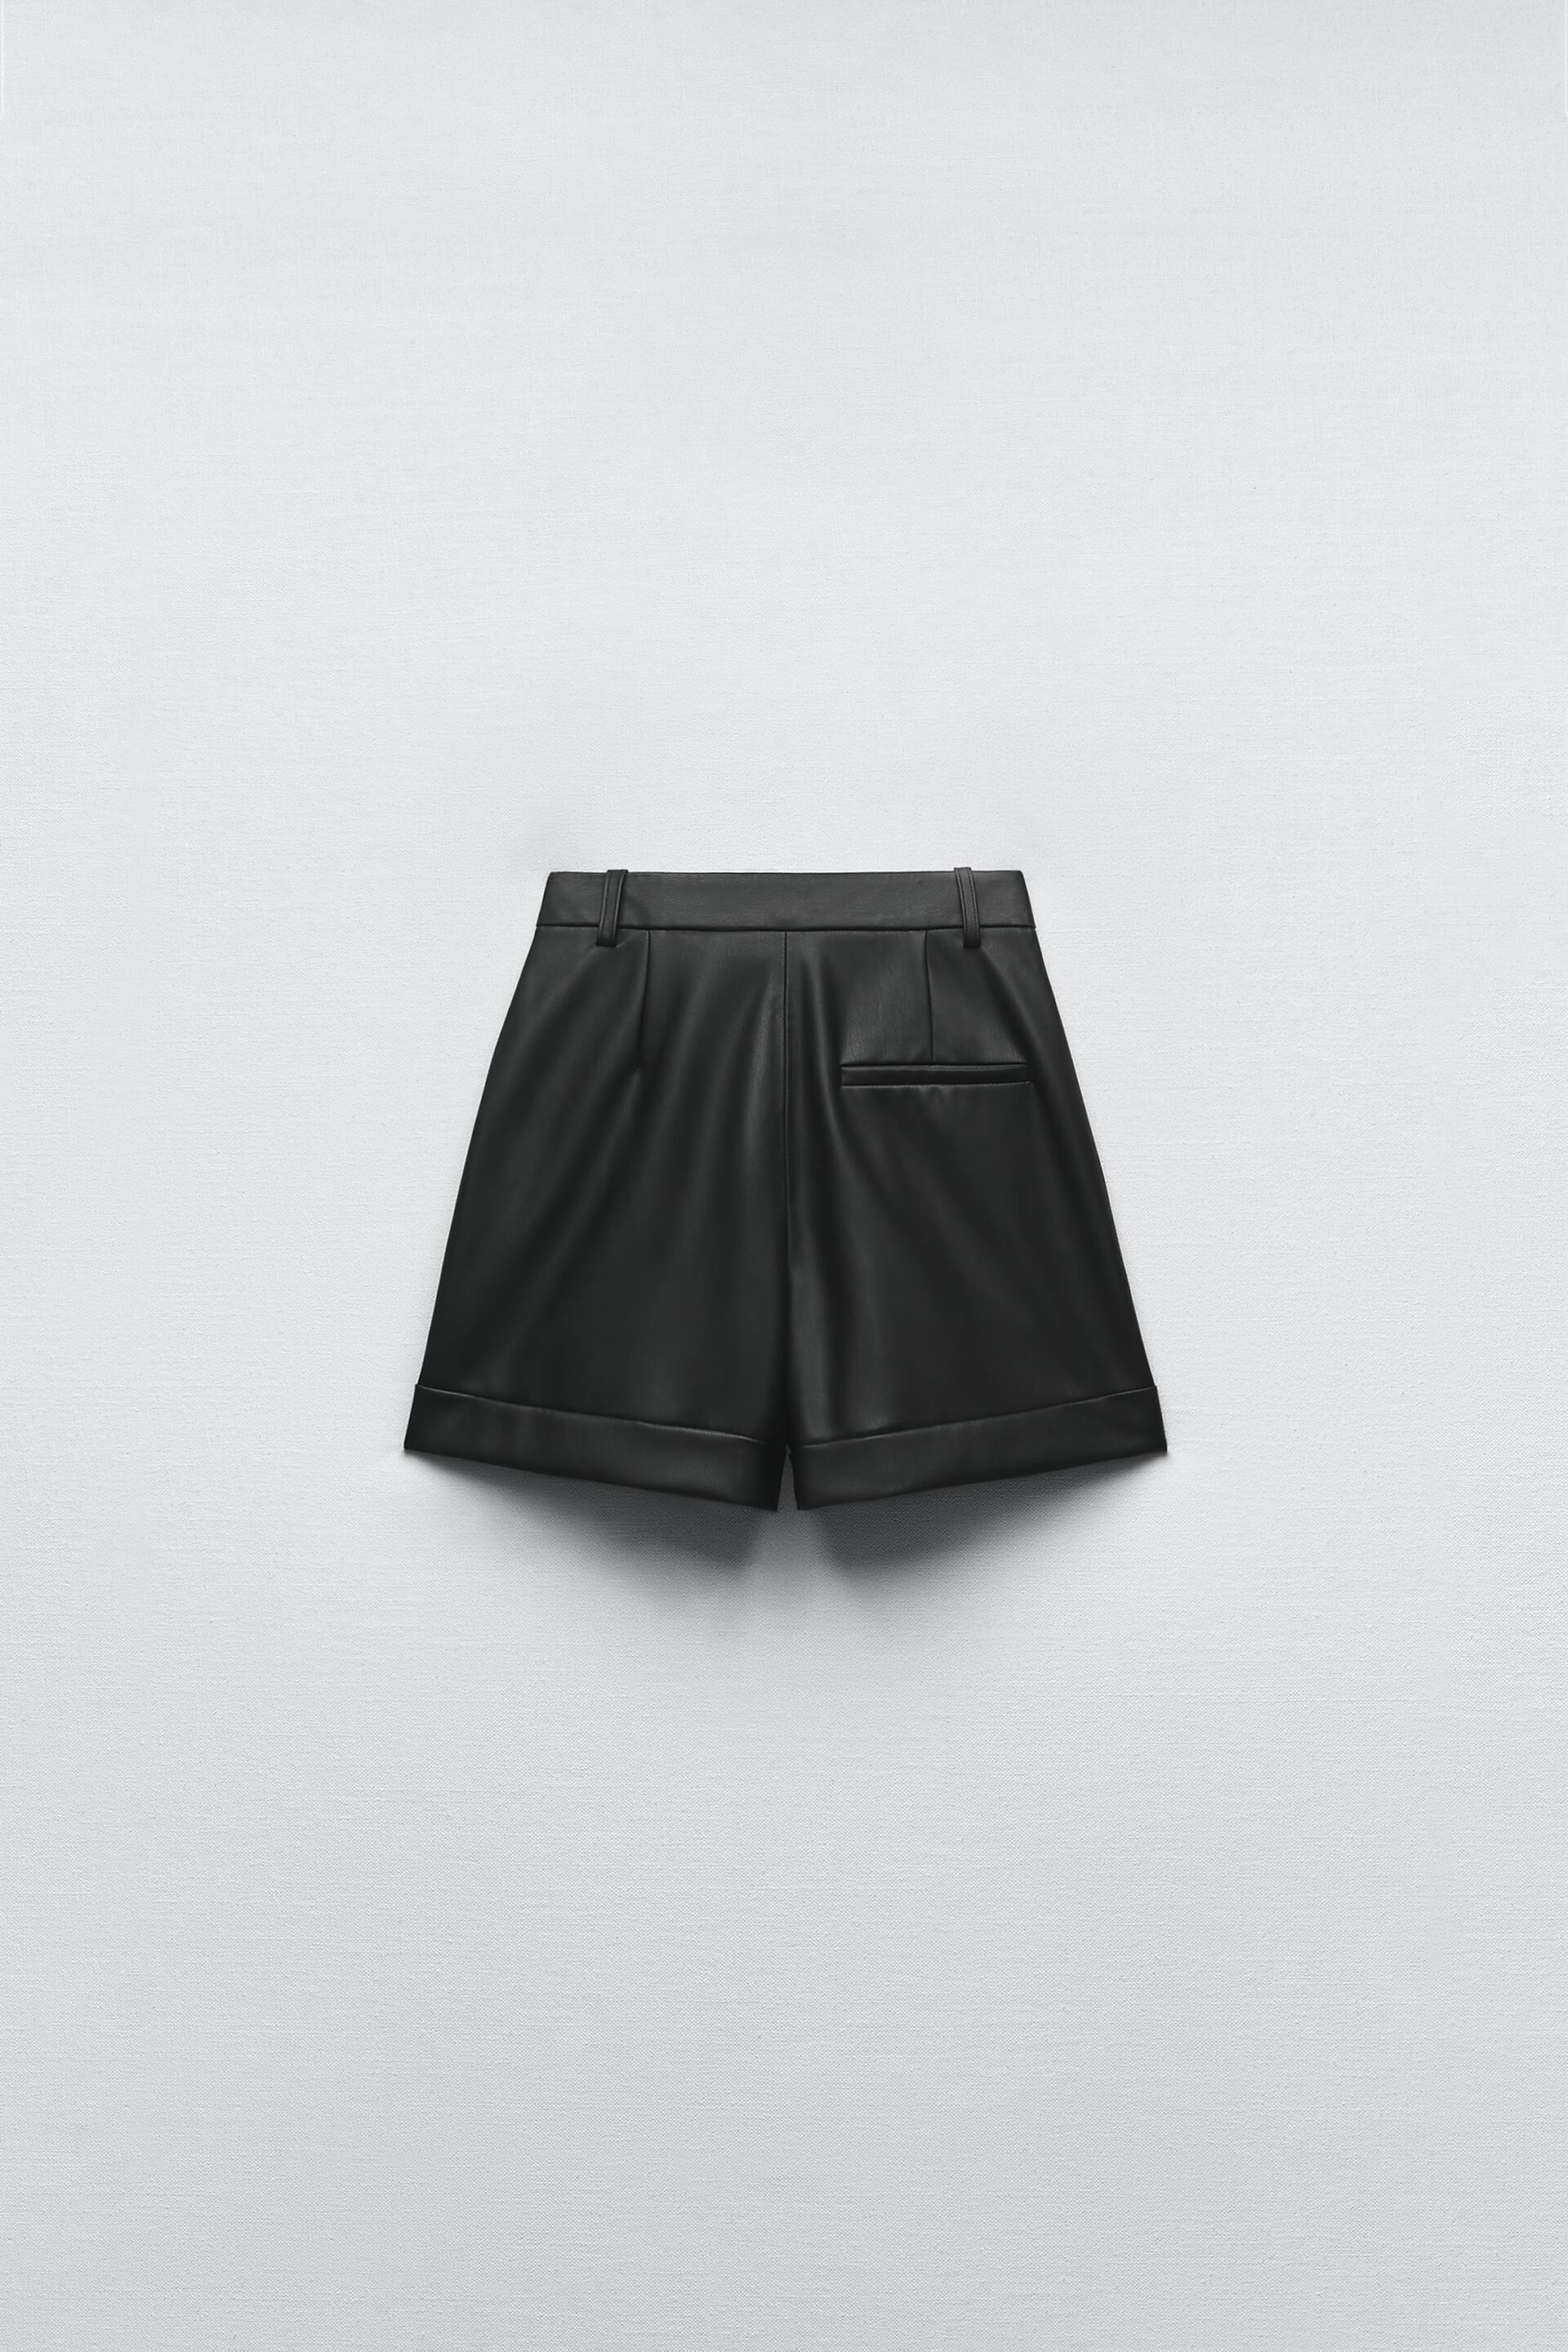 Zara Pleated Faux Leather Skirt | lupon.gov.ph